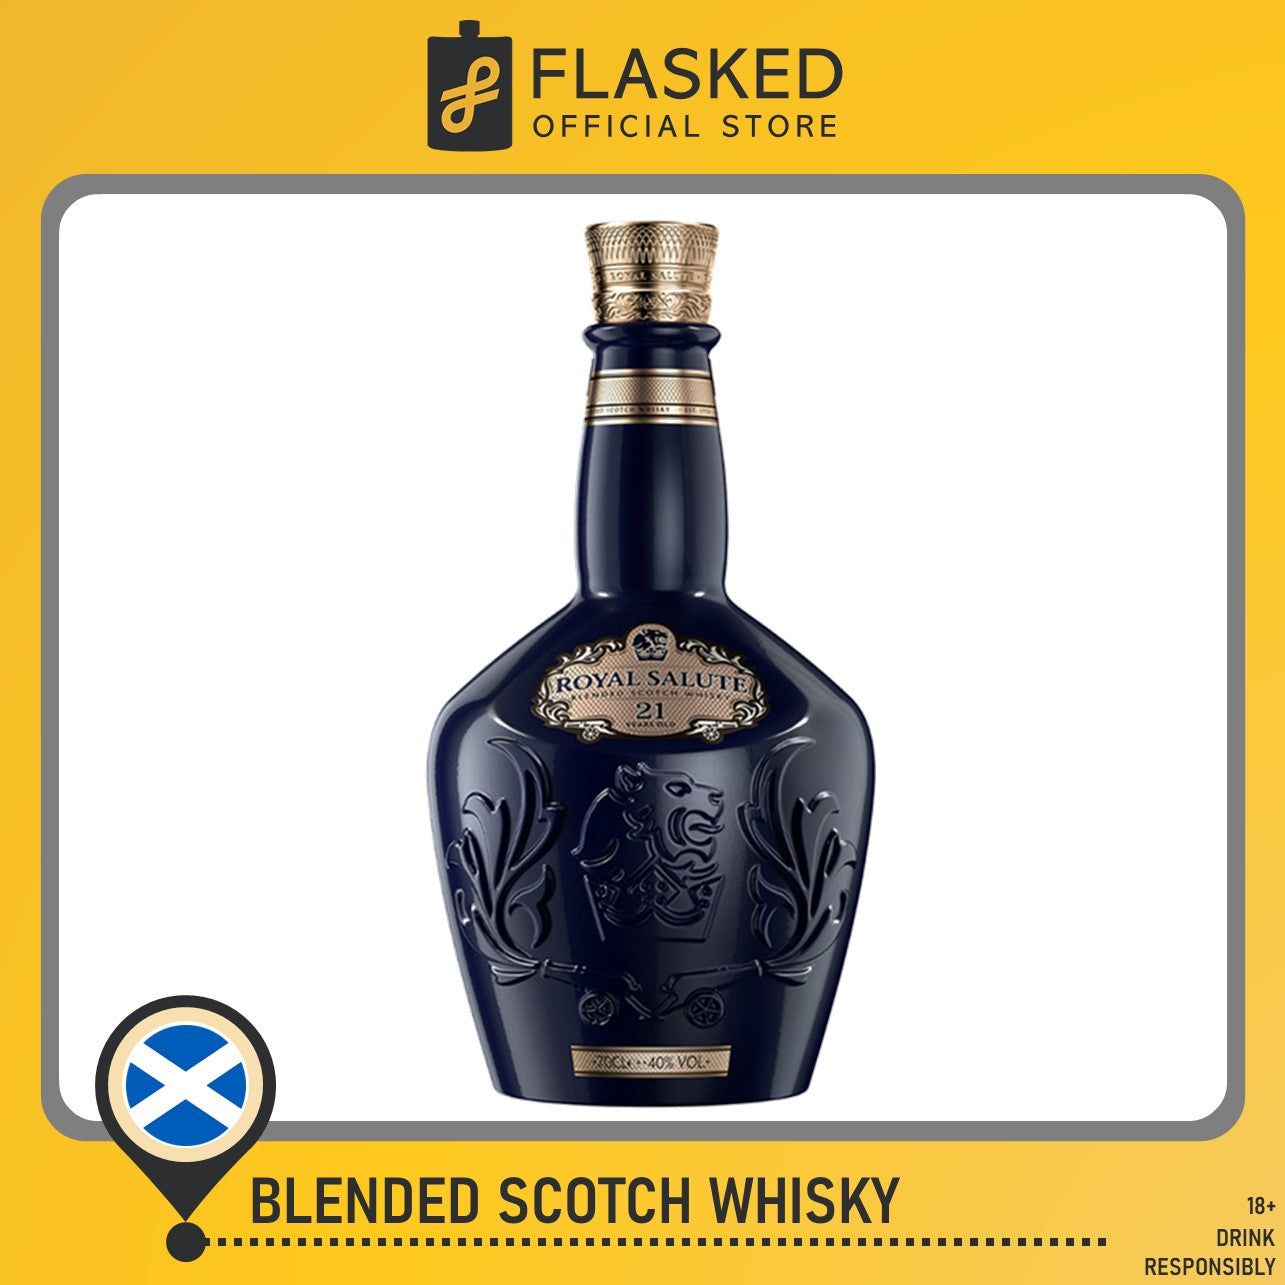 Royal Salute 21 Year Old Blended Scotch Whisky 700mL – Flasked